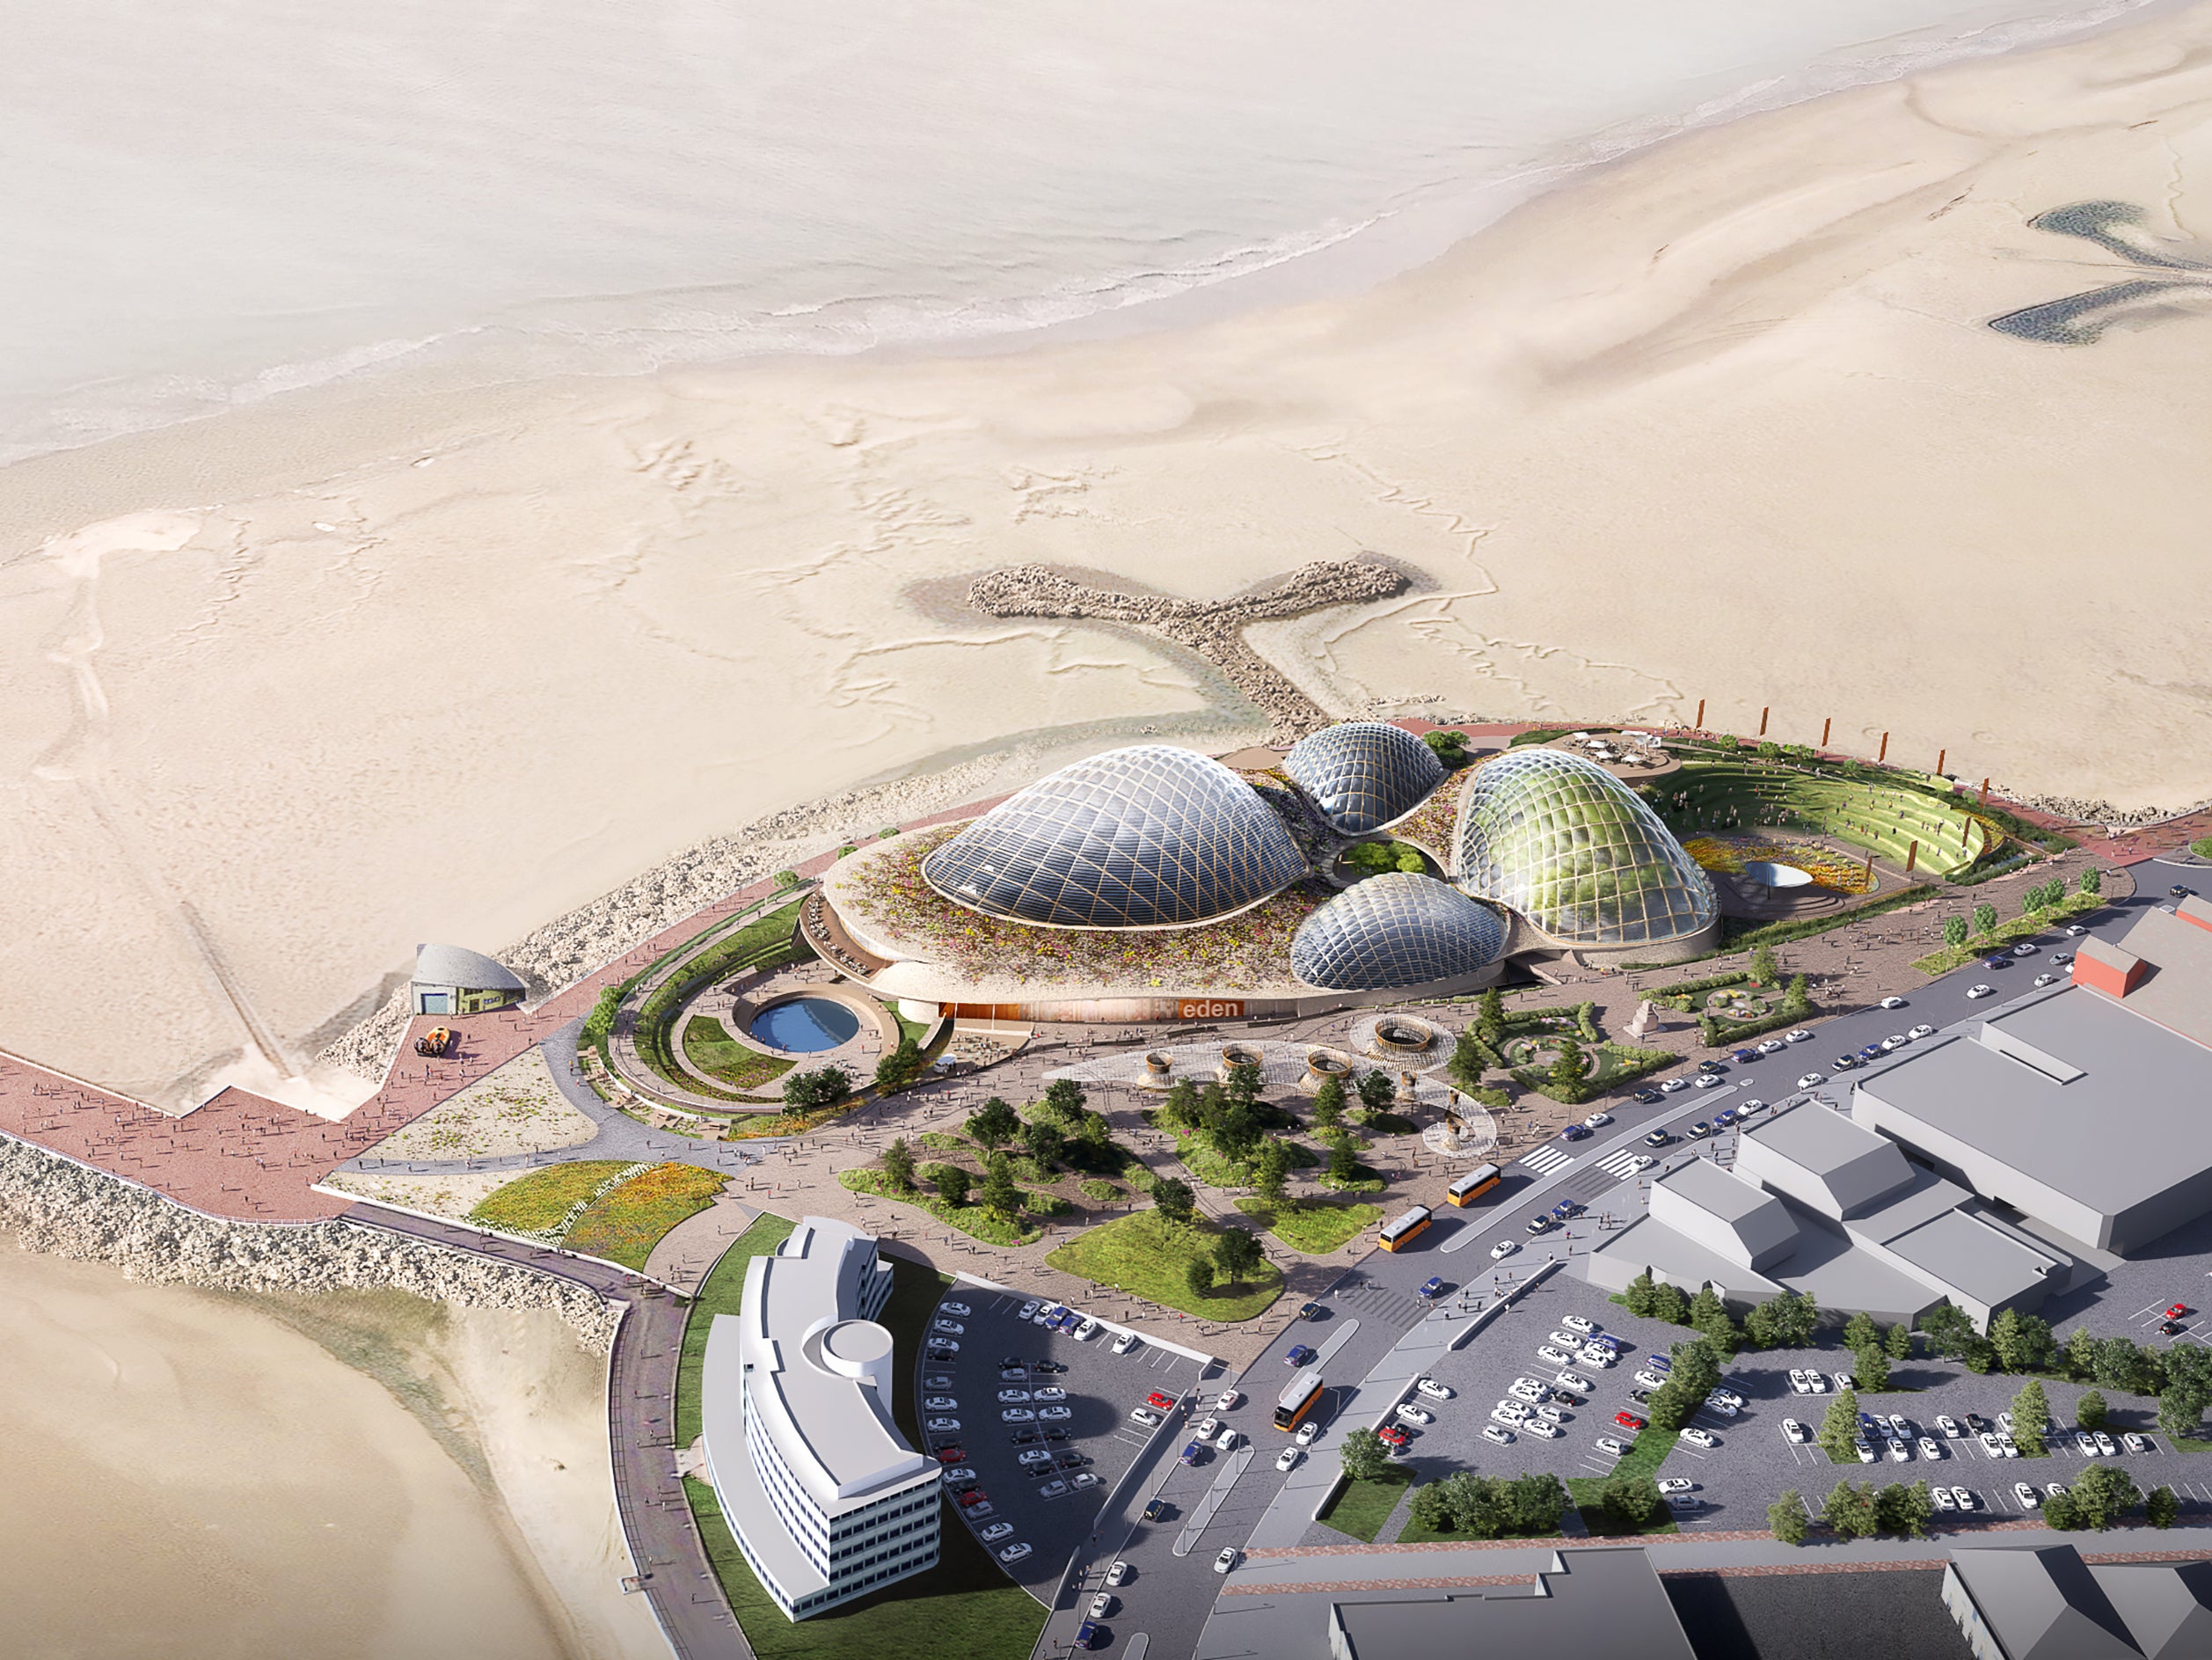 An image of the proposed Morecambe Eden Project